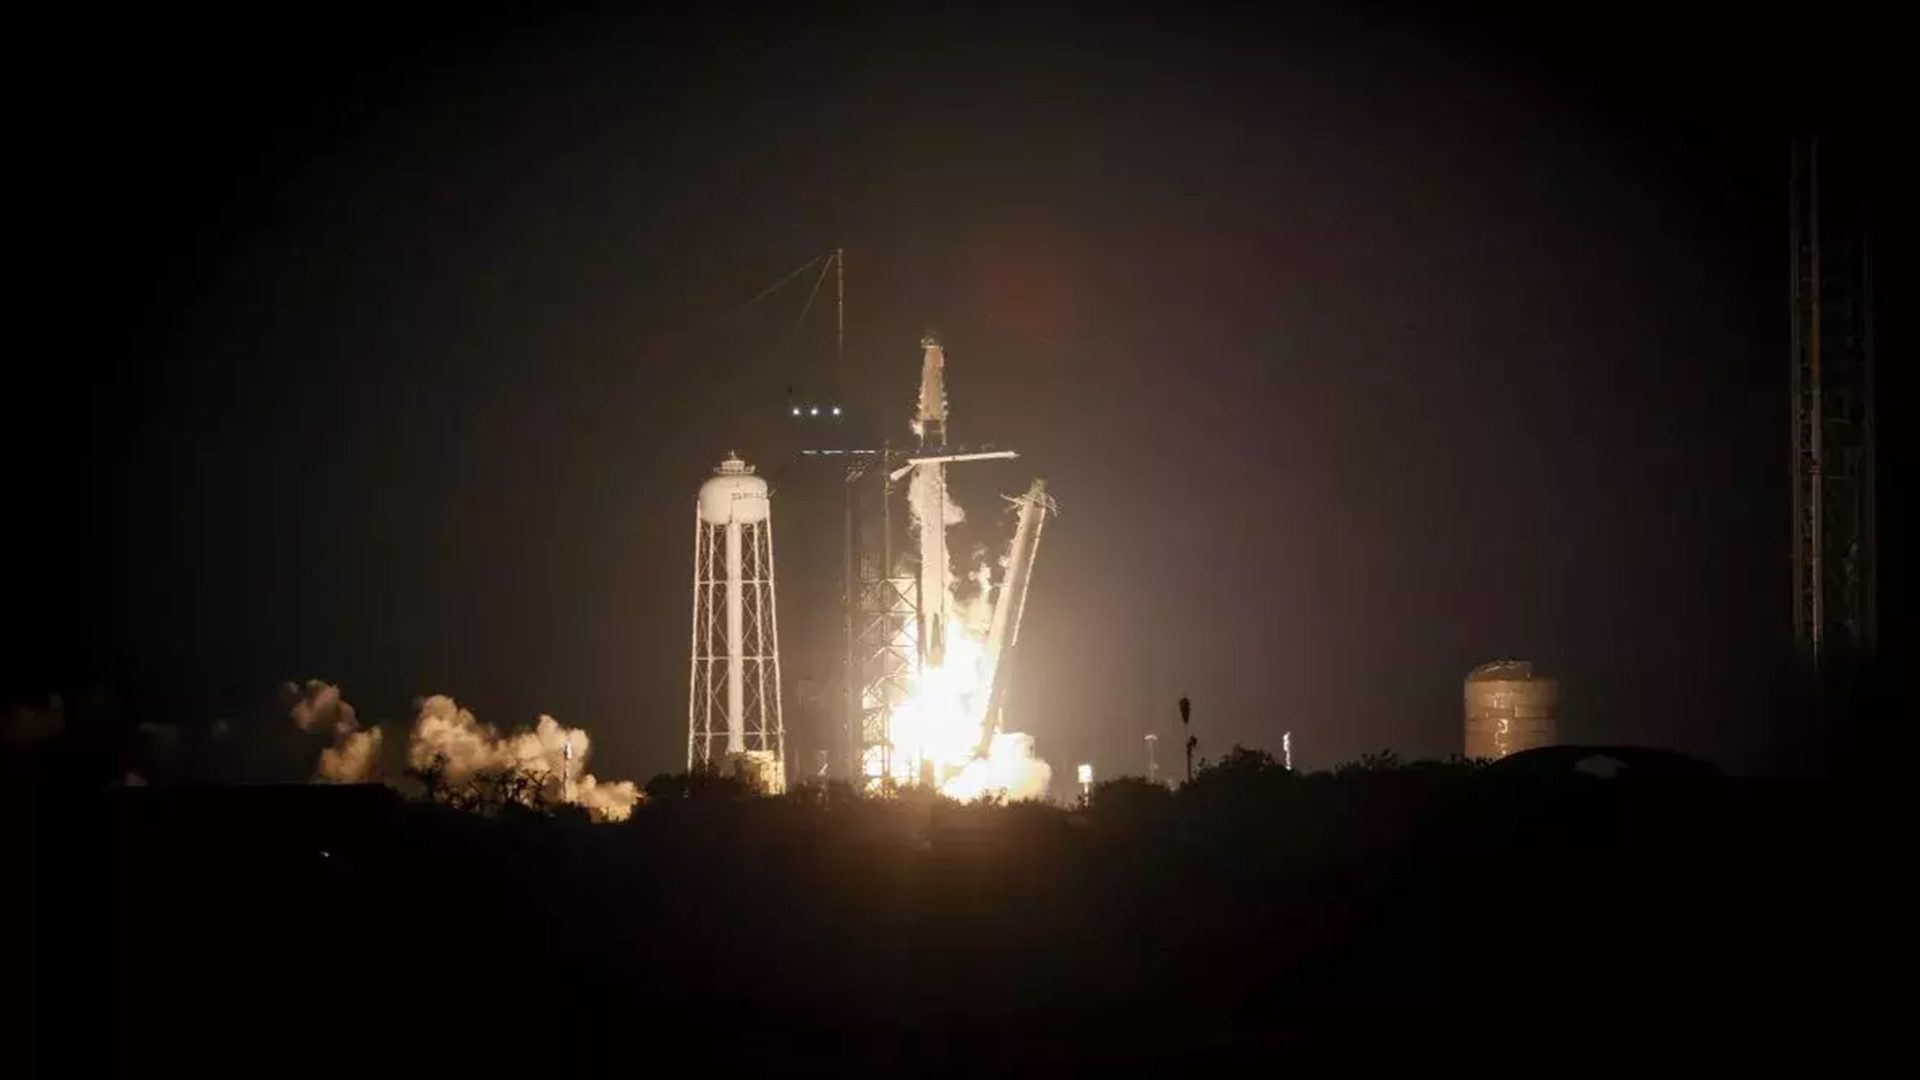 SpaceX’s Falcon 9 rocket, with the company’s Dragon Endeavour spacecraft atop, lifts off from Kennedy Space Center at 12:34 a.m. EST on March 2, 2023